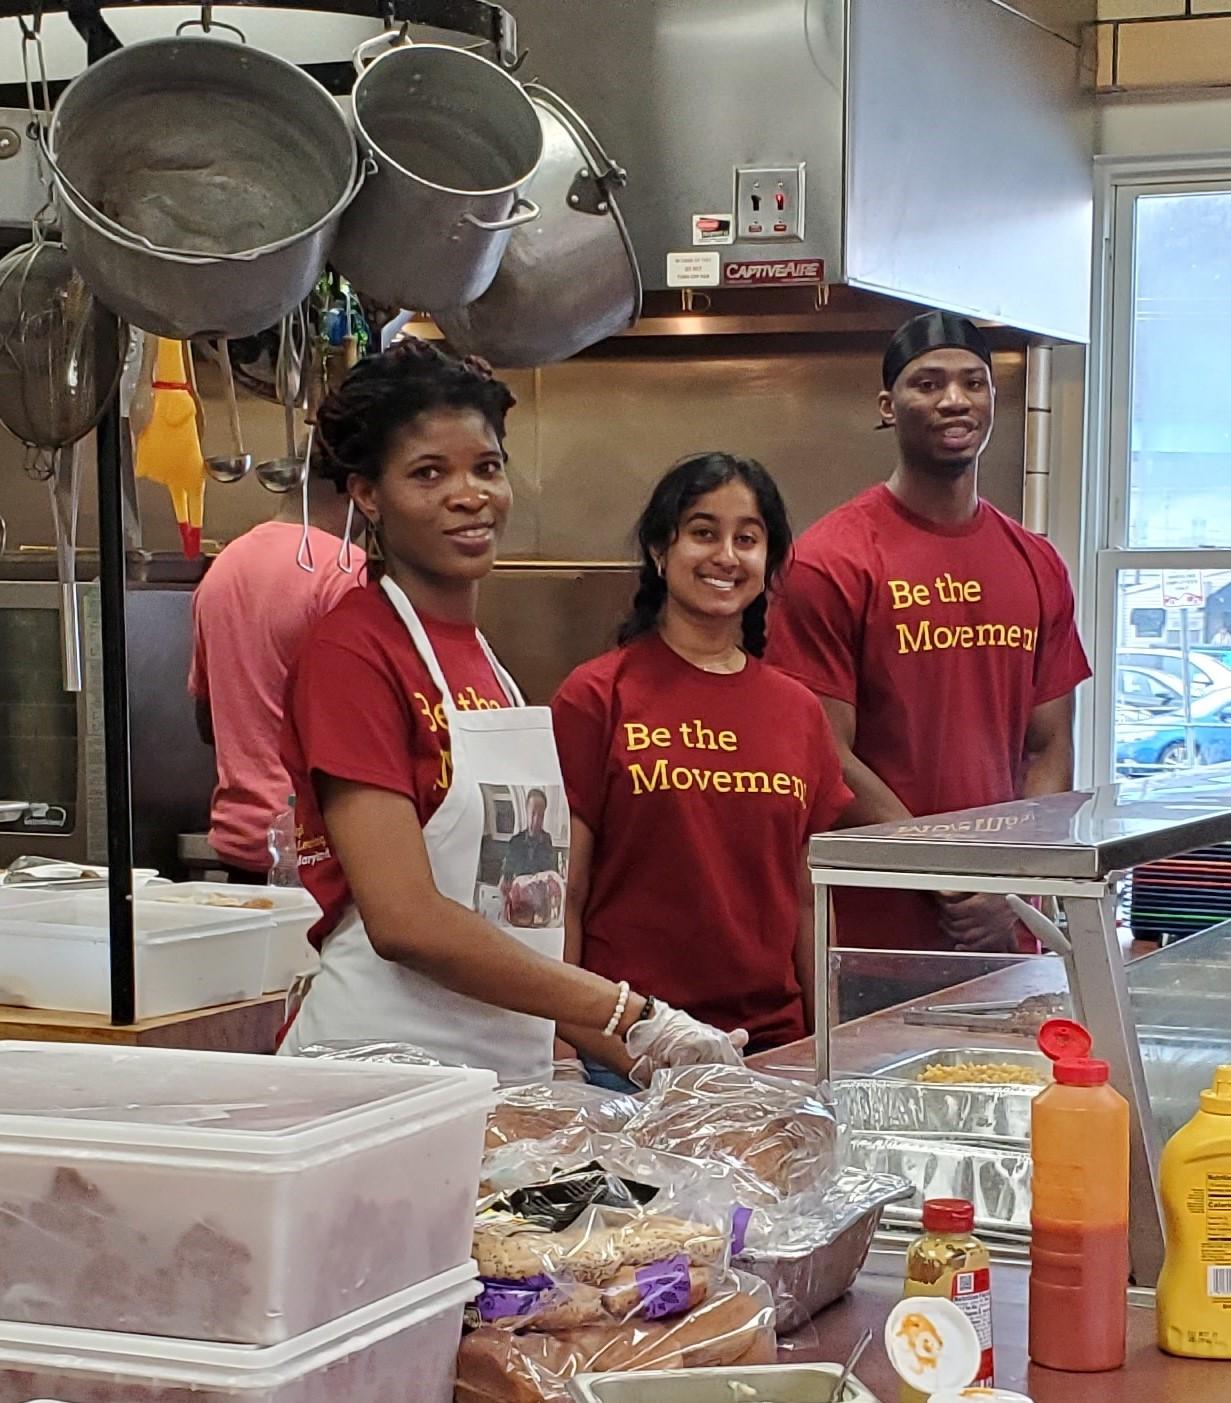 Students volunteering at soup kitchen